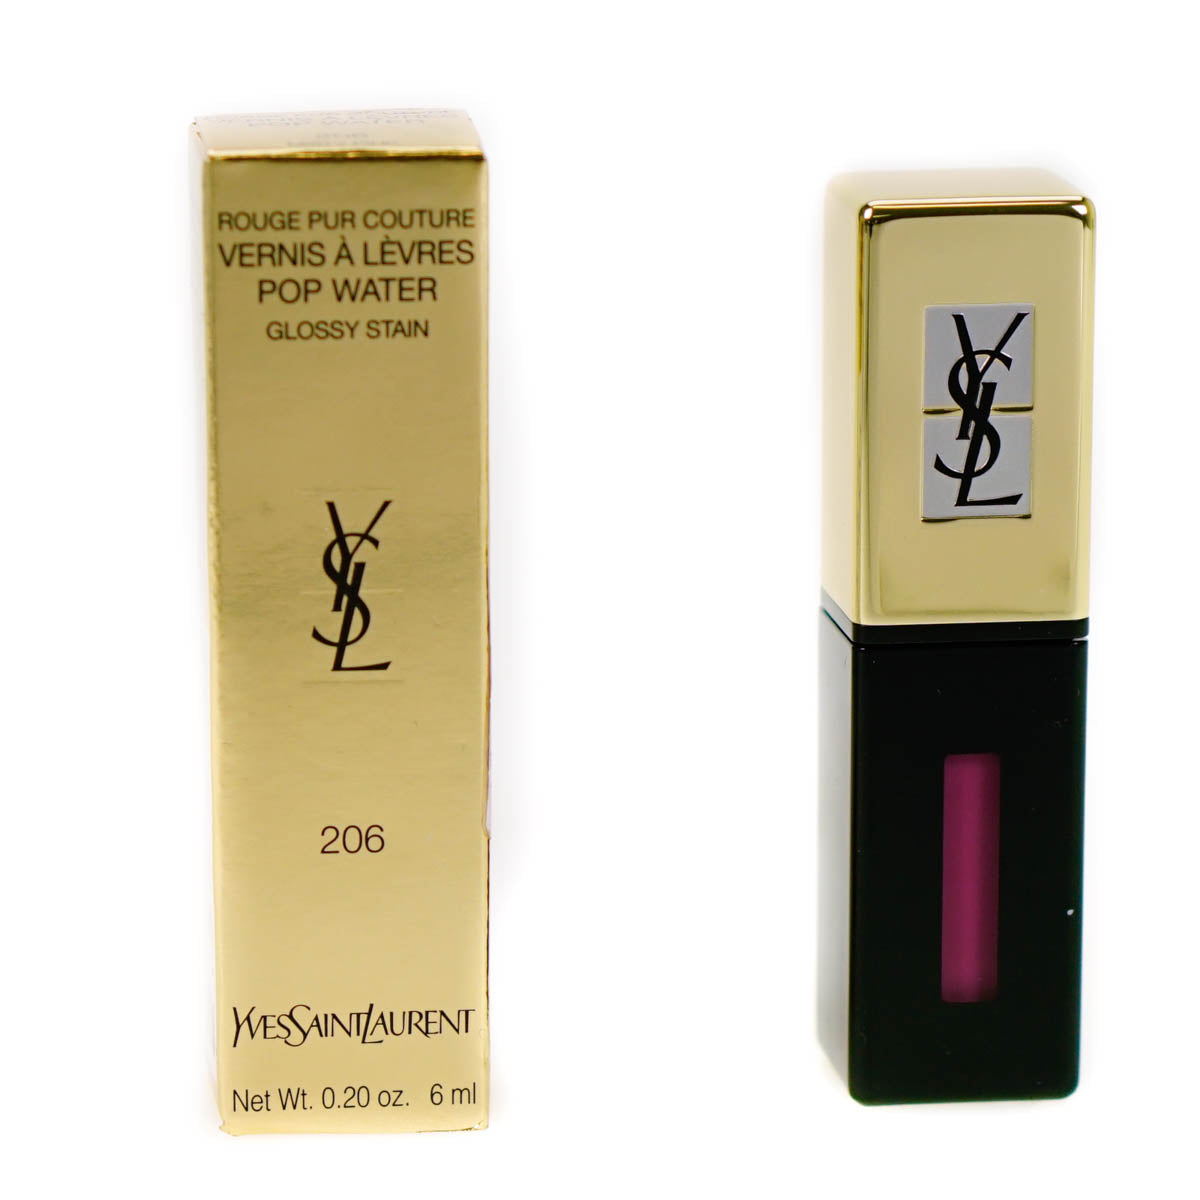 Yves Saint Laurent Pop Water Glossy Stain Misty Pink 206